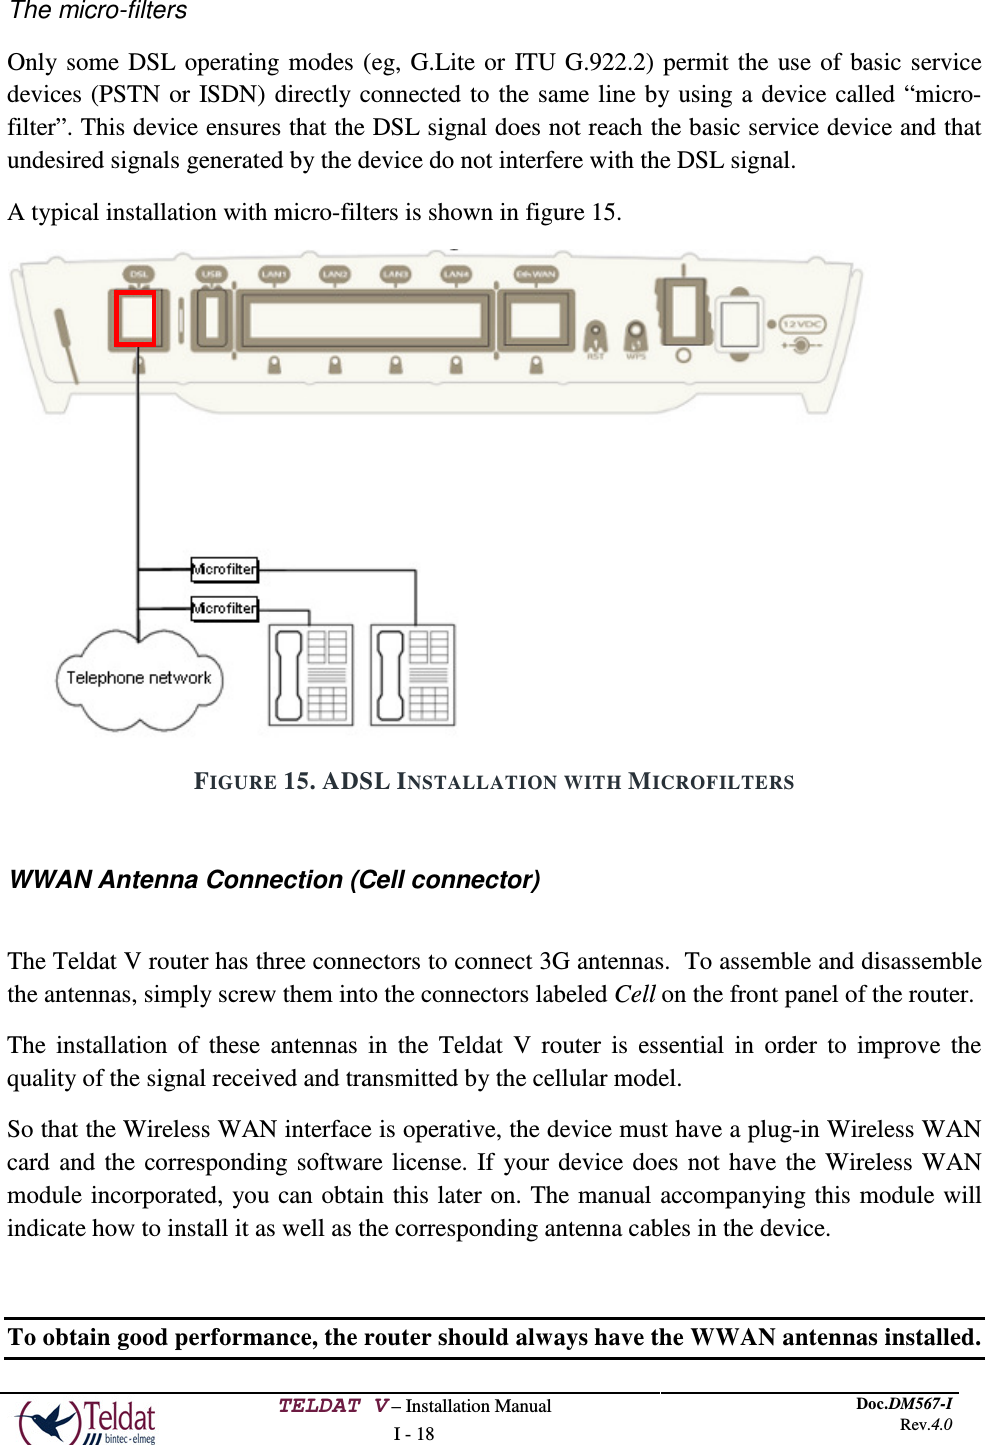  TELDAT V – Installation Manual I - 18 Doc.DM567-I Rev.4.0   The micro-filters Only some DSL operating modes (eg, G.Lite or ITU G.922.2) permit the use of basic service devices (PSTN or ISDN) directly connected to the same line by using a device called “micro-filter”. This device ensures that the DSL signal does not reach the basic service device and that undesired signals generated by the device do not interfere with the DSL signal. A typical installation with micro-filters is shown in figure 15.  FIGURE 15. ADSL INSTALLATION WITH MICROFILTERS  WWAN Antenna Connection (Cell connector)  The Teldat V router has three connectors to connect 3G antennas.  To assemble and disassemble the antennas, simply screw them into the connectors labeled Cell on the front panel of the router. The installation of these antennas in the Teldat V router is essential in order to improve the quality of the signal received and transmitted by the cellular model. So that the Wireless WAN interface is operative, the device must have a plug-in Wireless WAN card and the corresponding software license. If your device does not have the Wireless WAN module incorporated, you can obtain this later on. The manual accompanying this module will indicate how to install it as well as the corresponding antenna cables in the device.  To obtain good performance, the router should always have the WWAN antennas installed.  